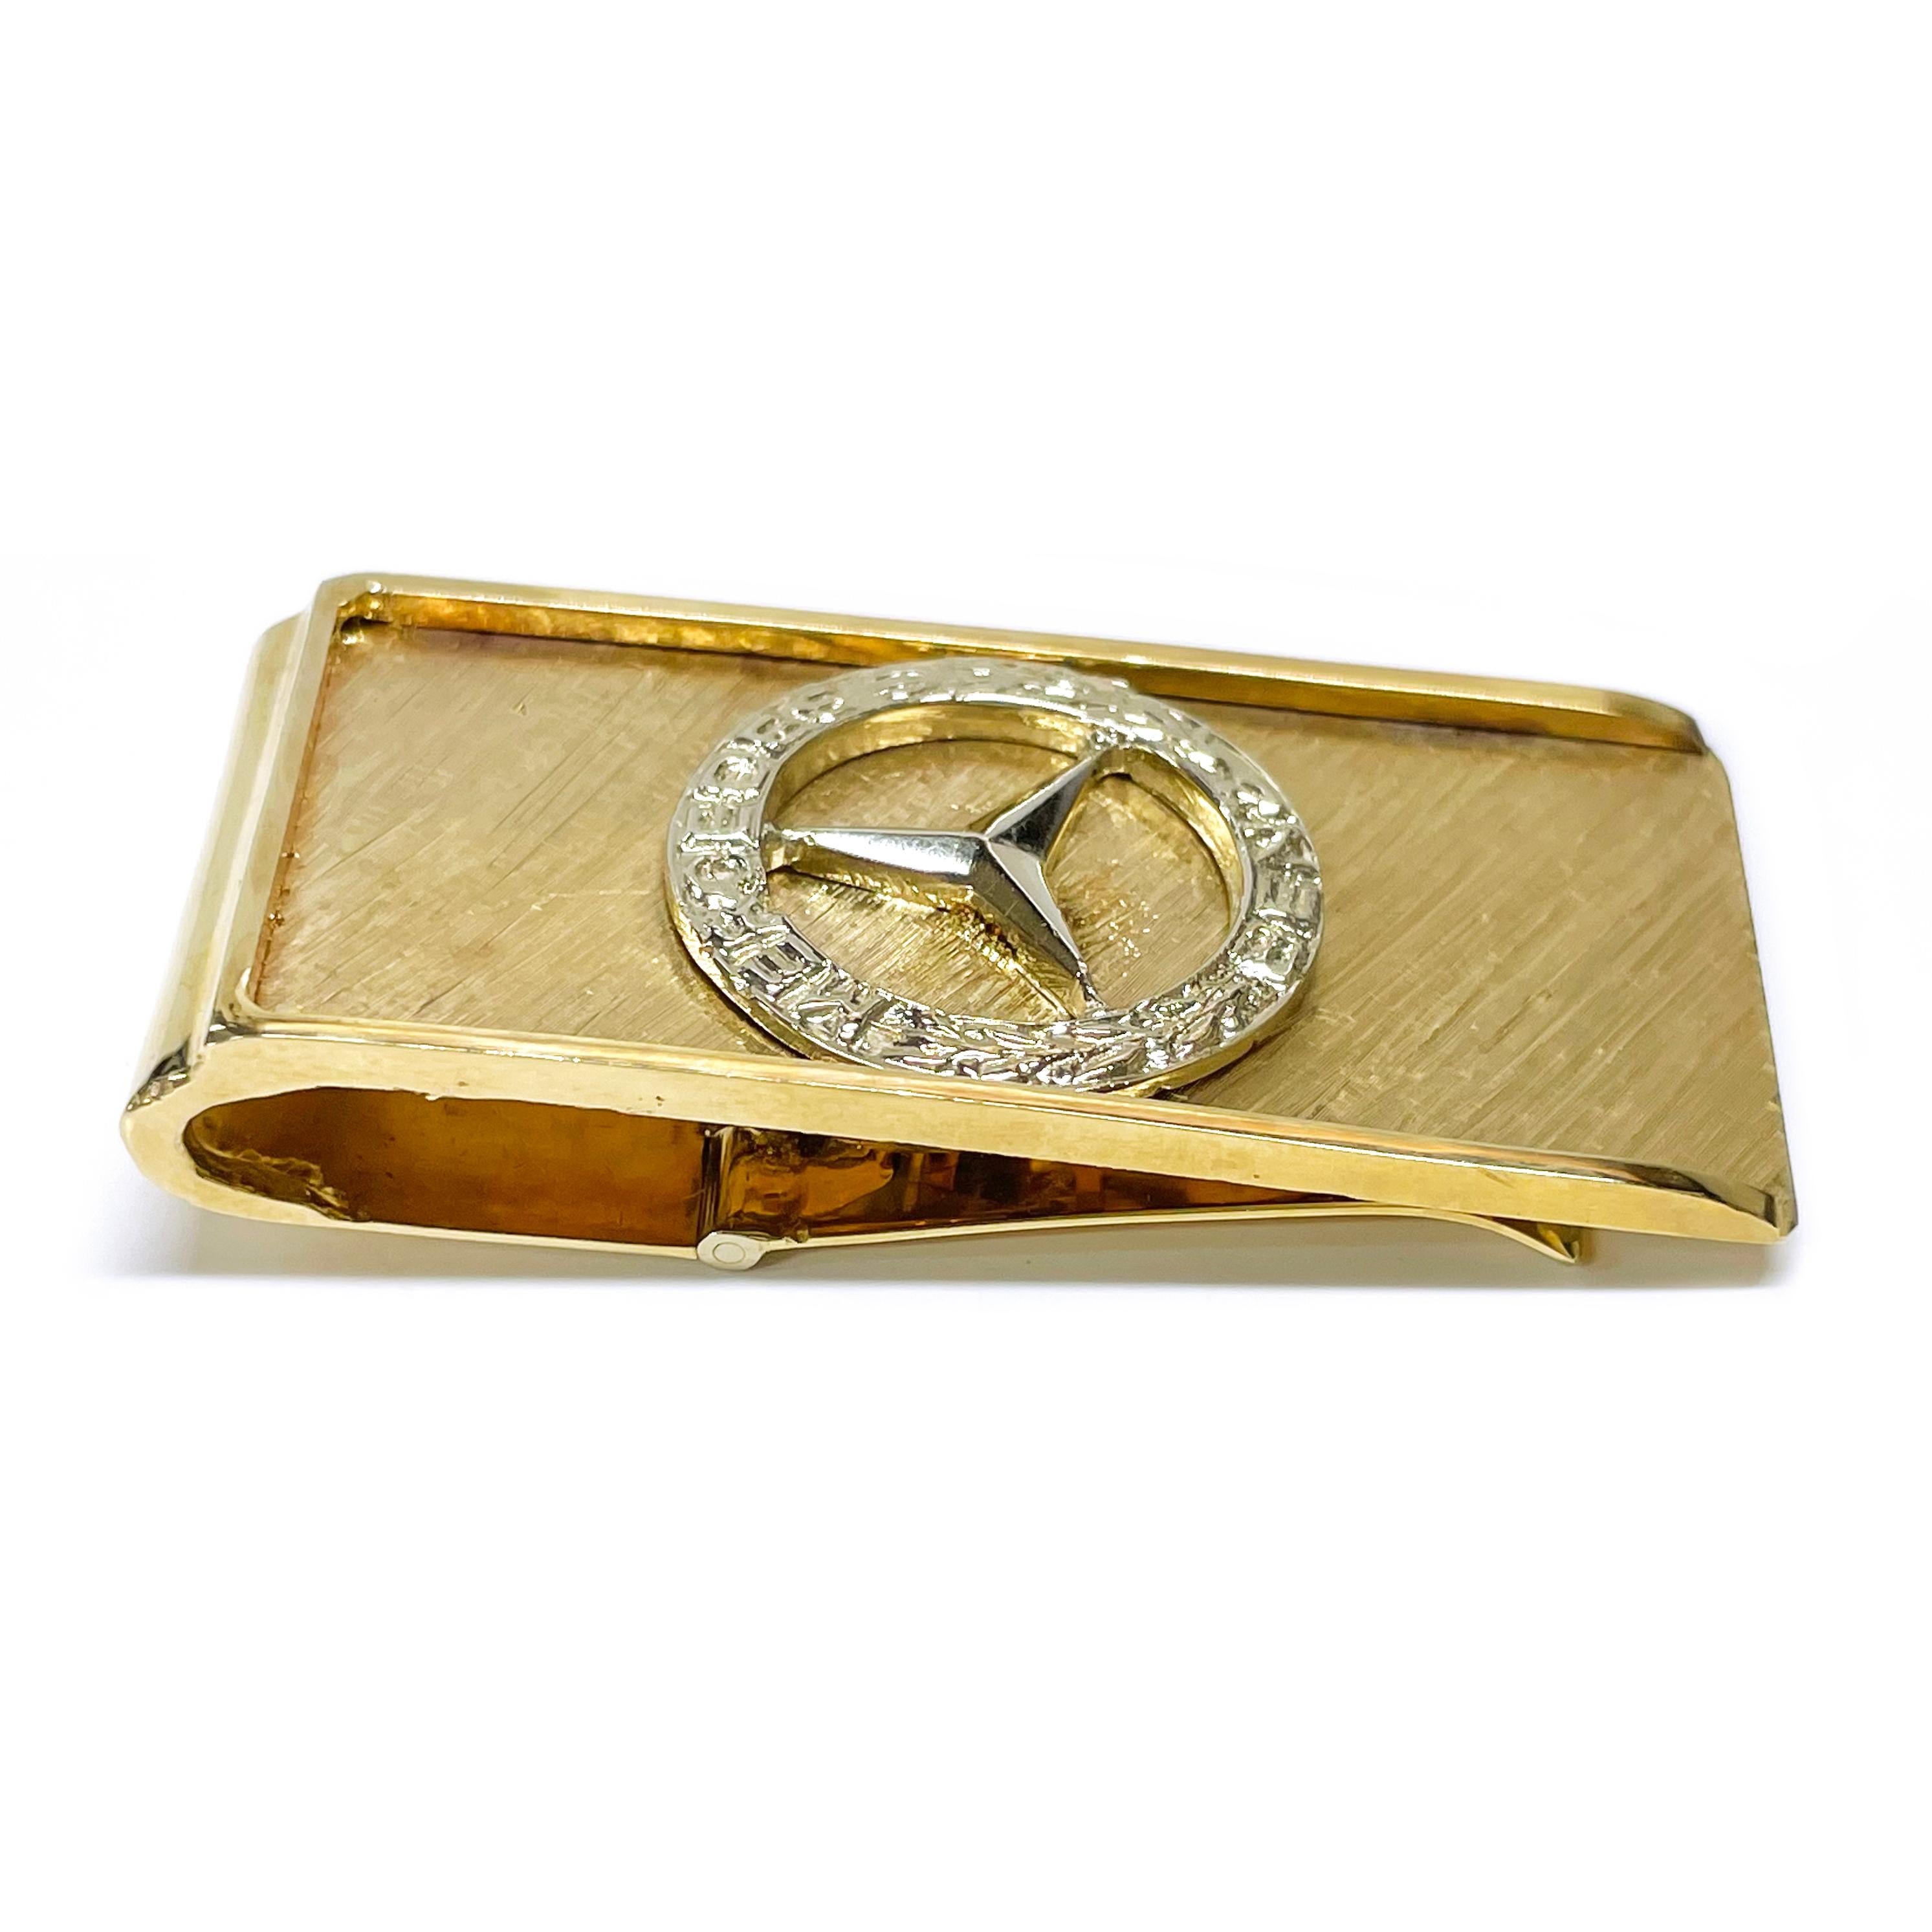 Mercedes 18 Karat Yellow Gold Hinged Money Clip. Handcrafted hinged money clip with custom made tubular roller, money won't be torn. The top of the tie clip has a satin brushed texture with raised bezel and Mercedes Benz logo with name. The